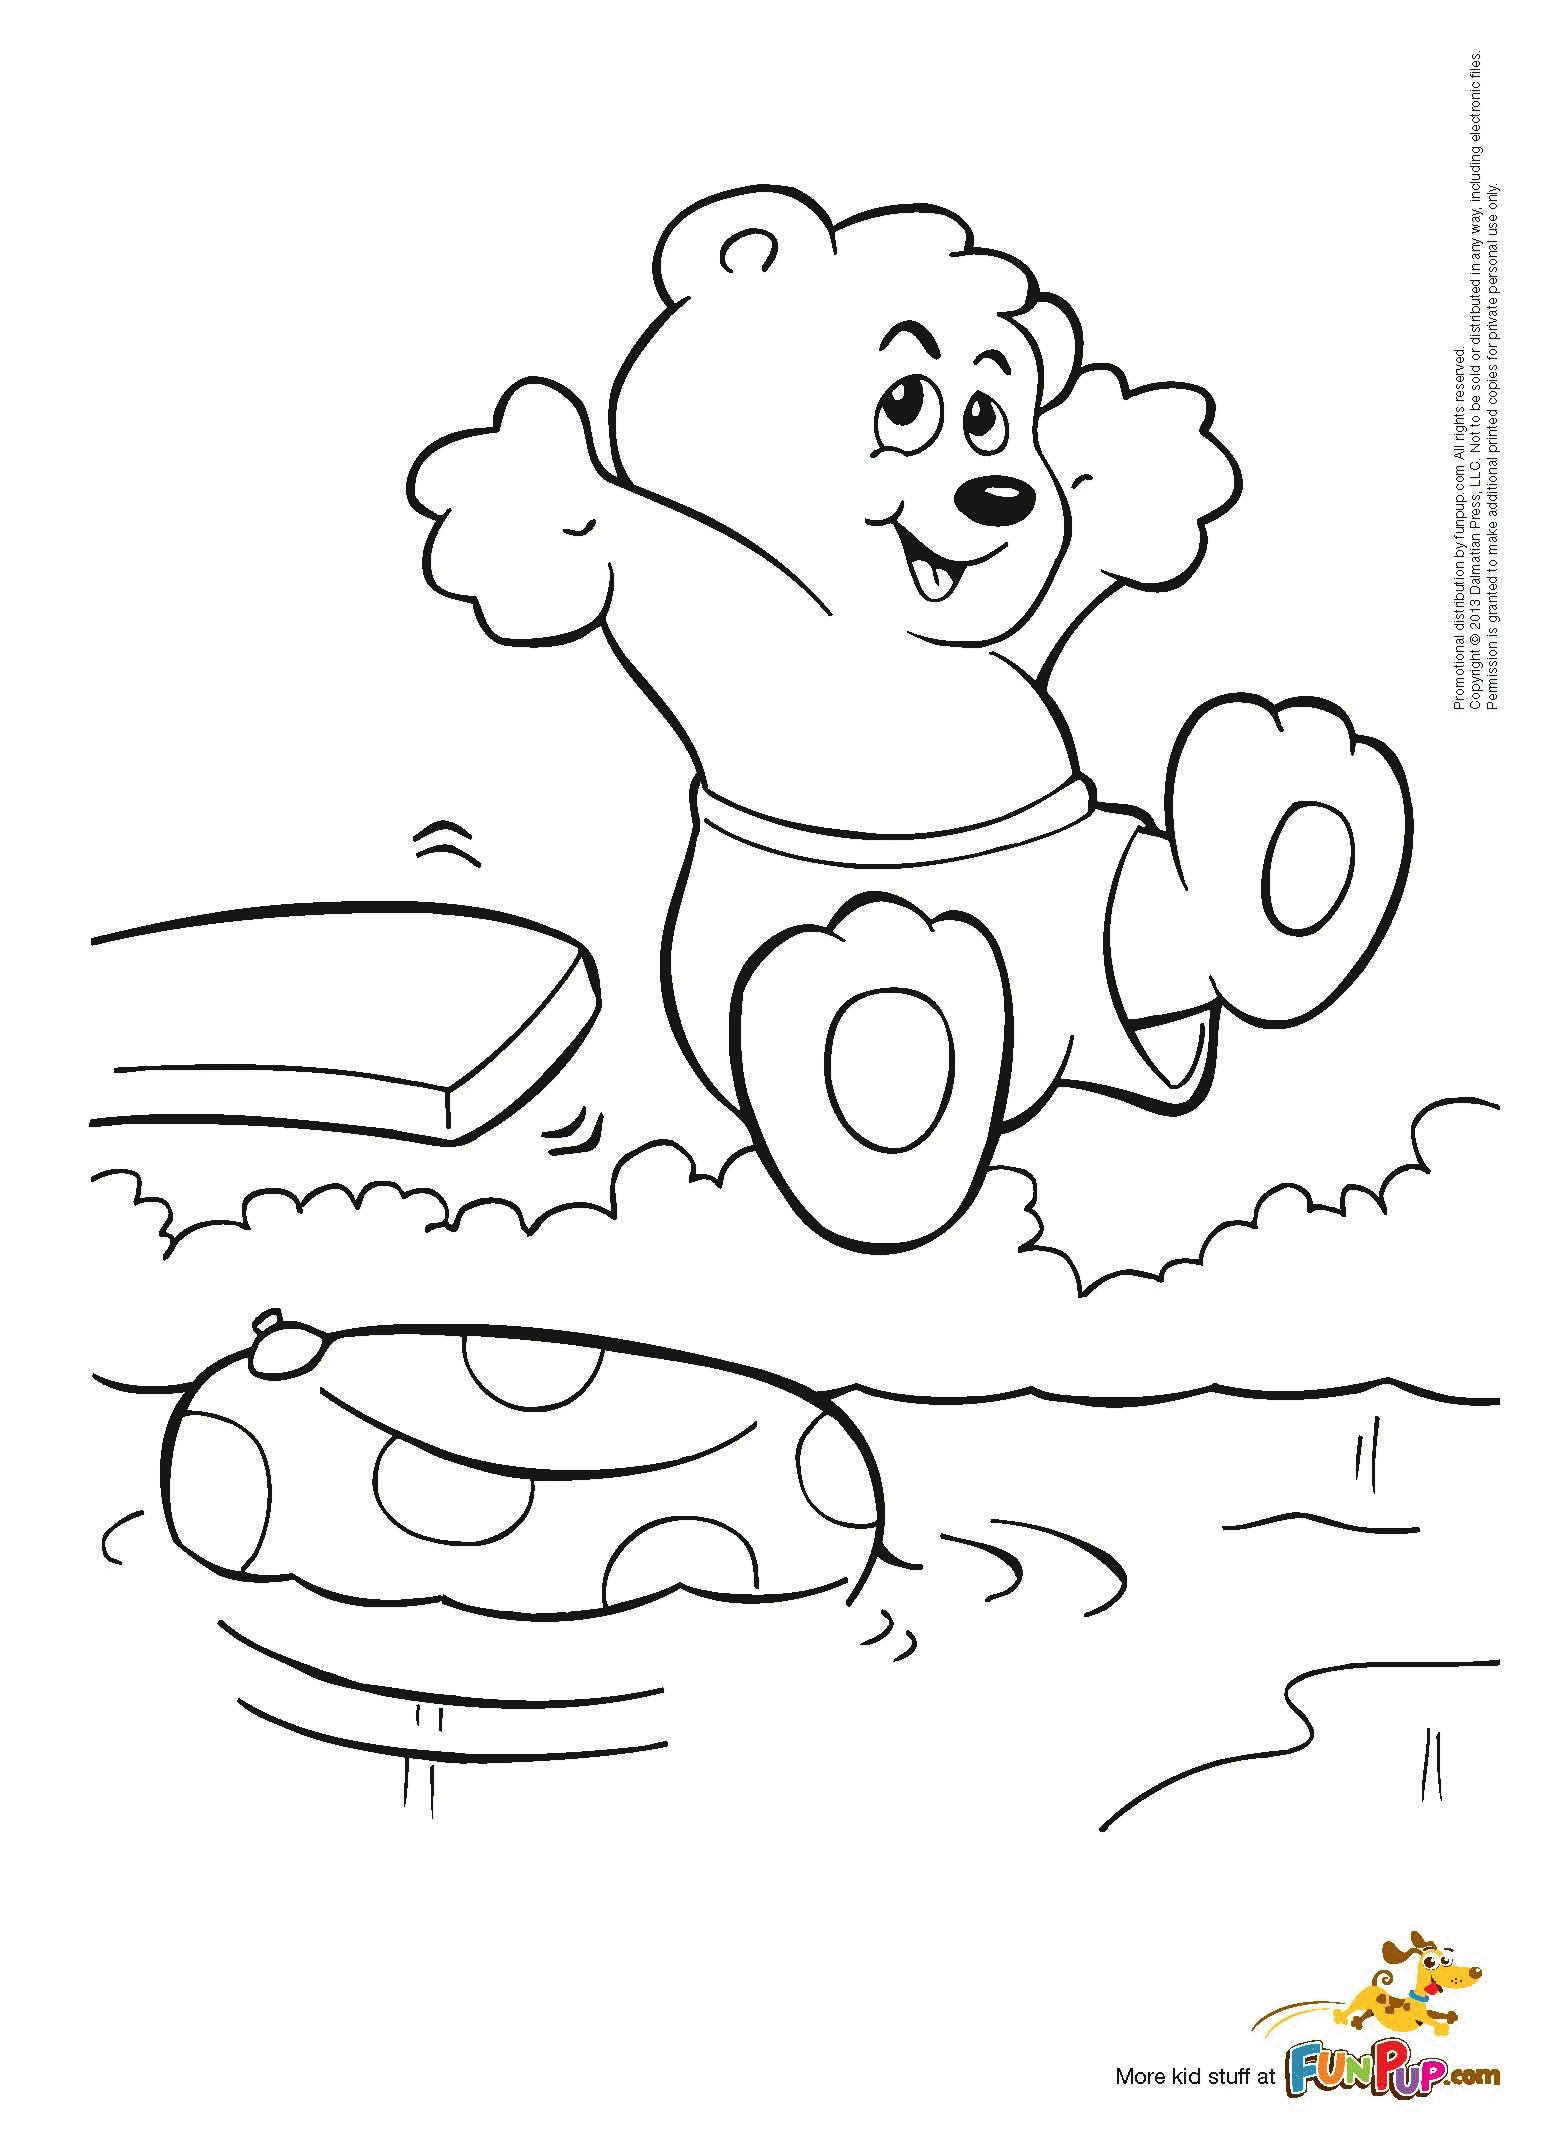 9 Pics of June Coloring Pages Printable - June Coloring Pages ...